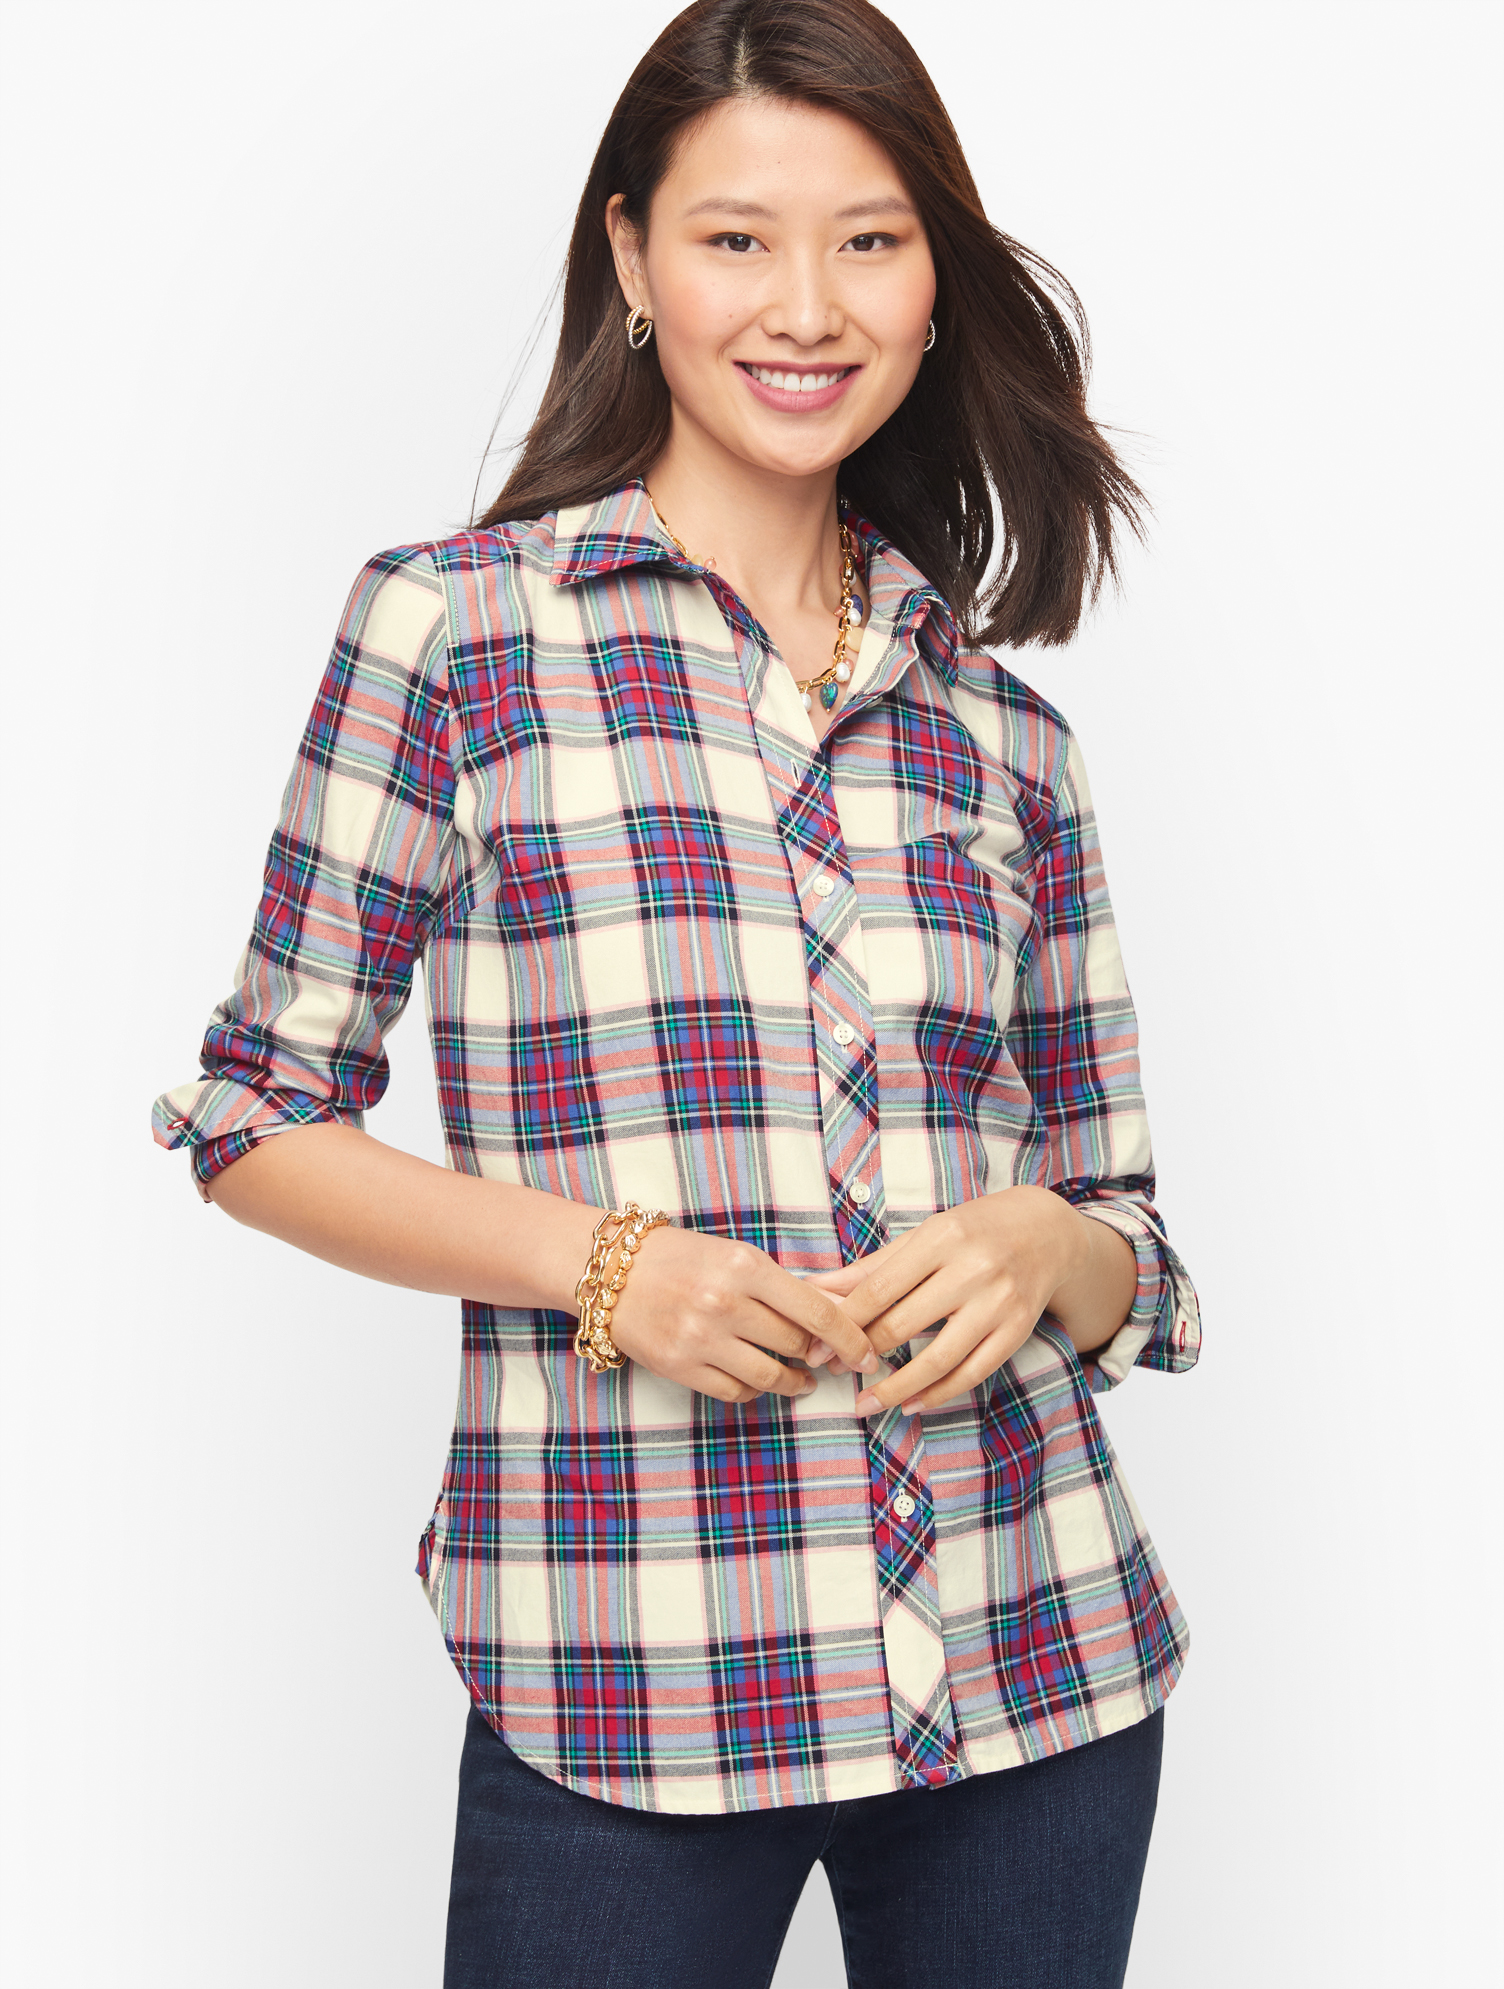 Talbots Petite - Cotton Button Front Shirt - Gift Plaid - Ivory - Small